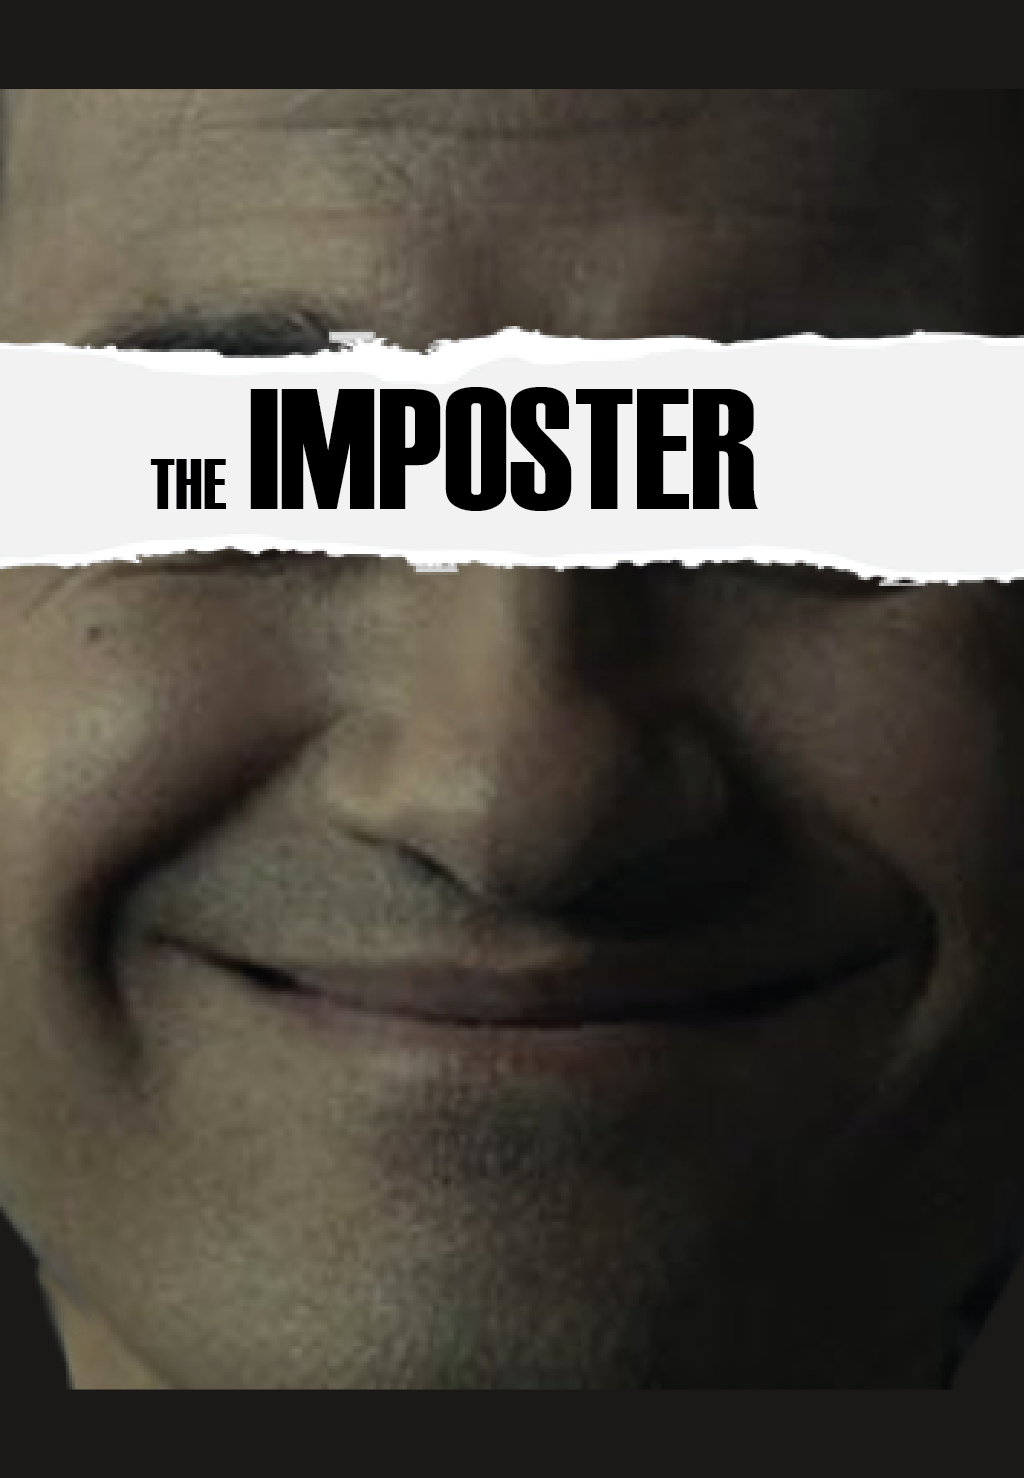  The Imposter Movie Poster